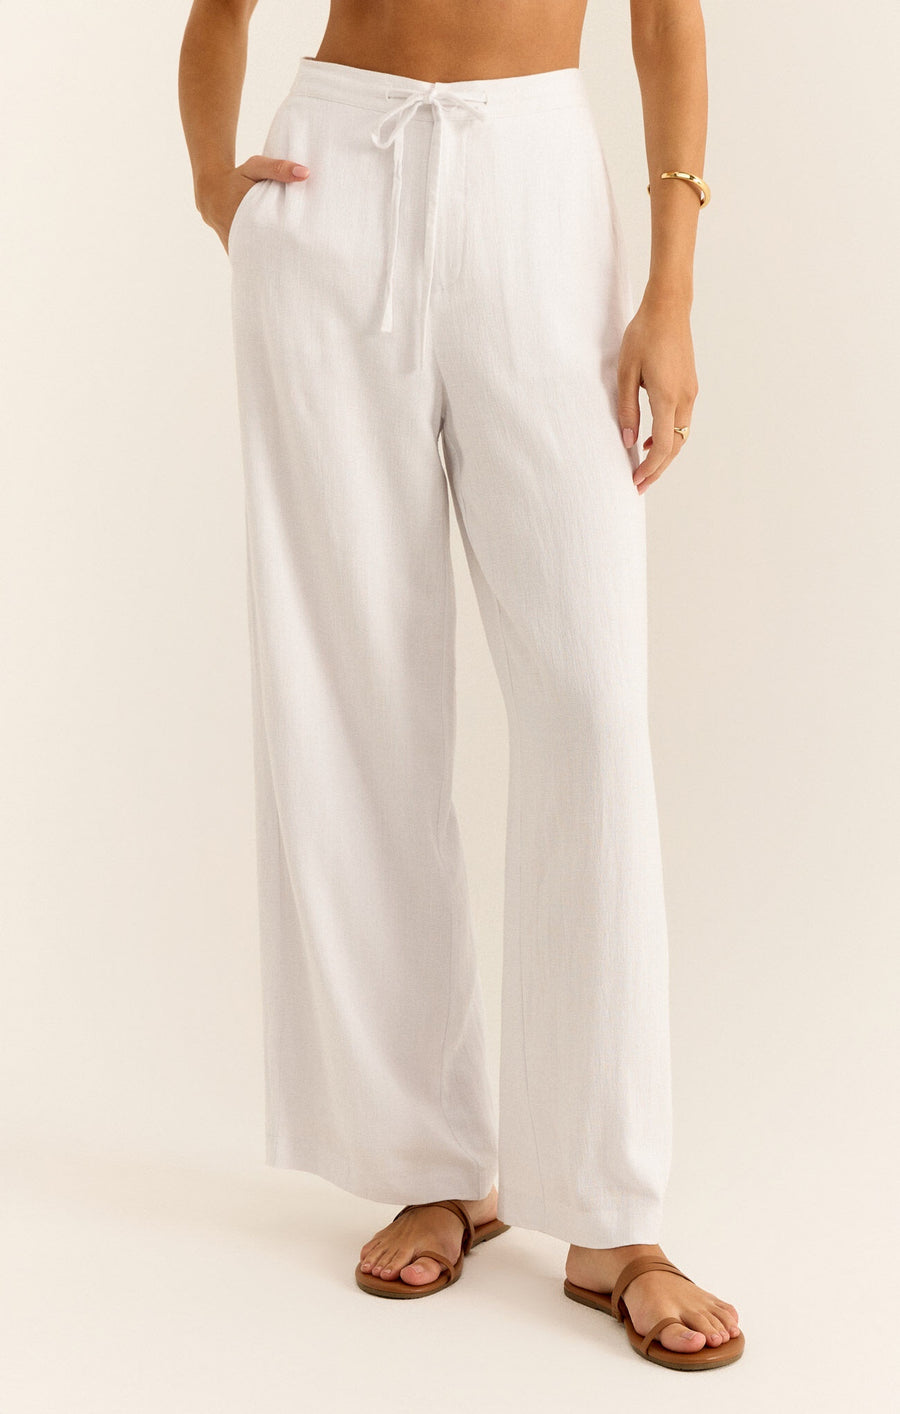 Featuring a wide leg linen pant with a zipper and button closure and a front tie detail in the color white 